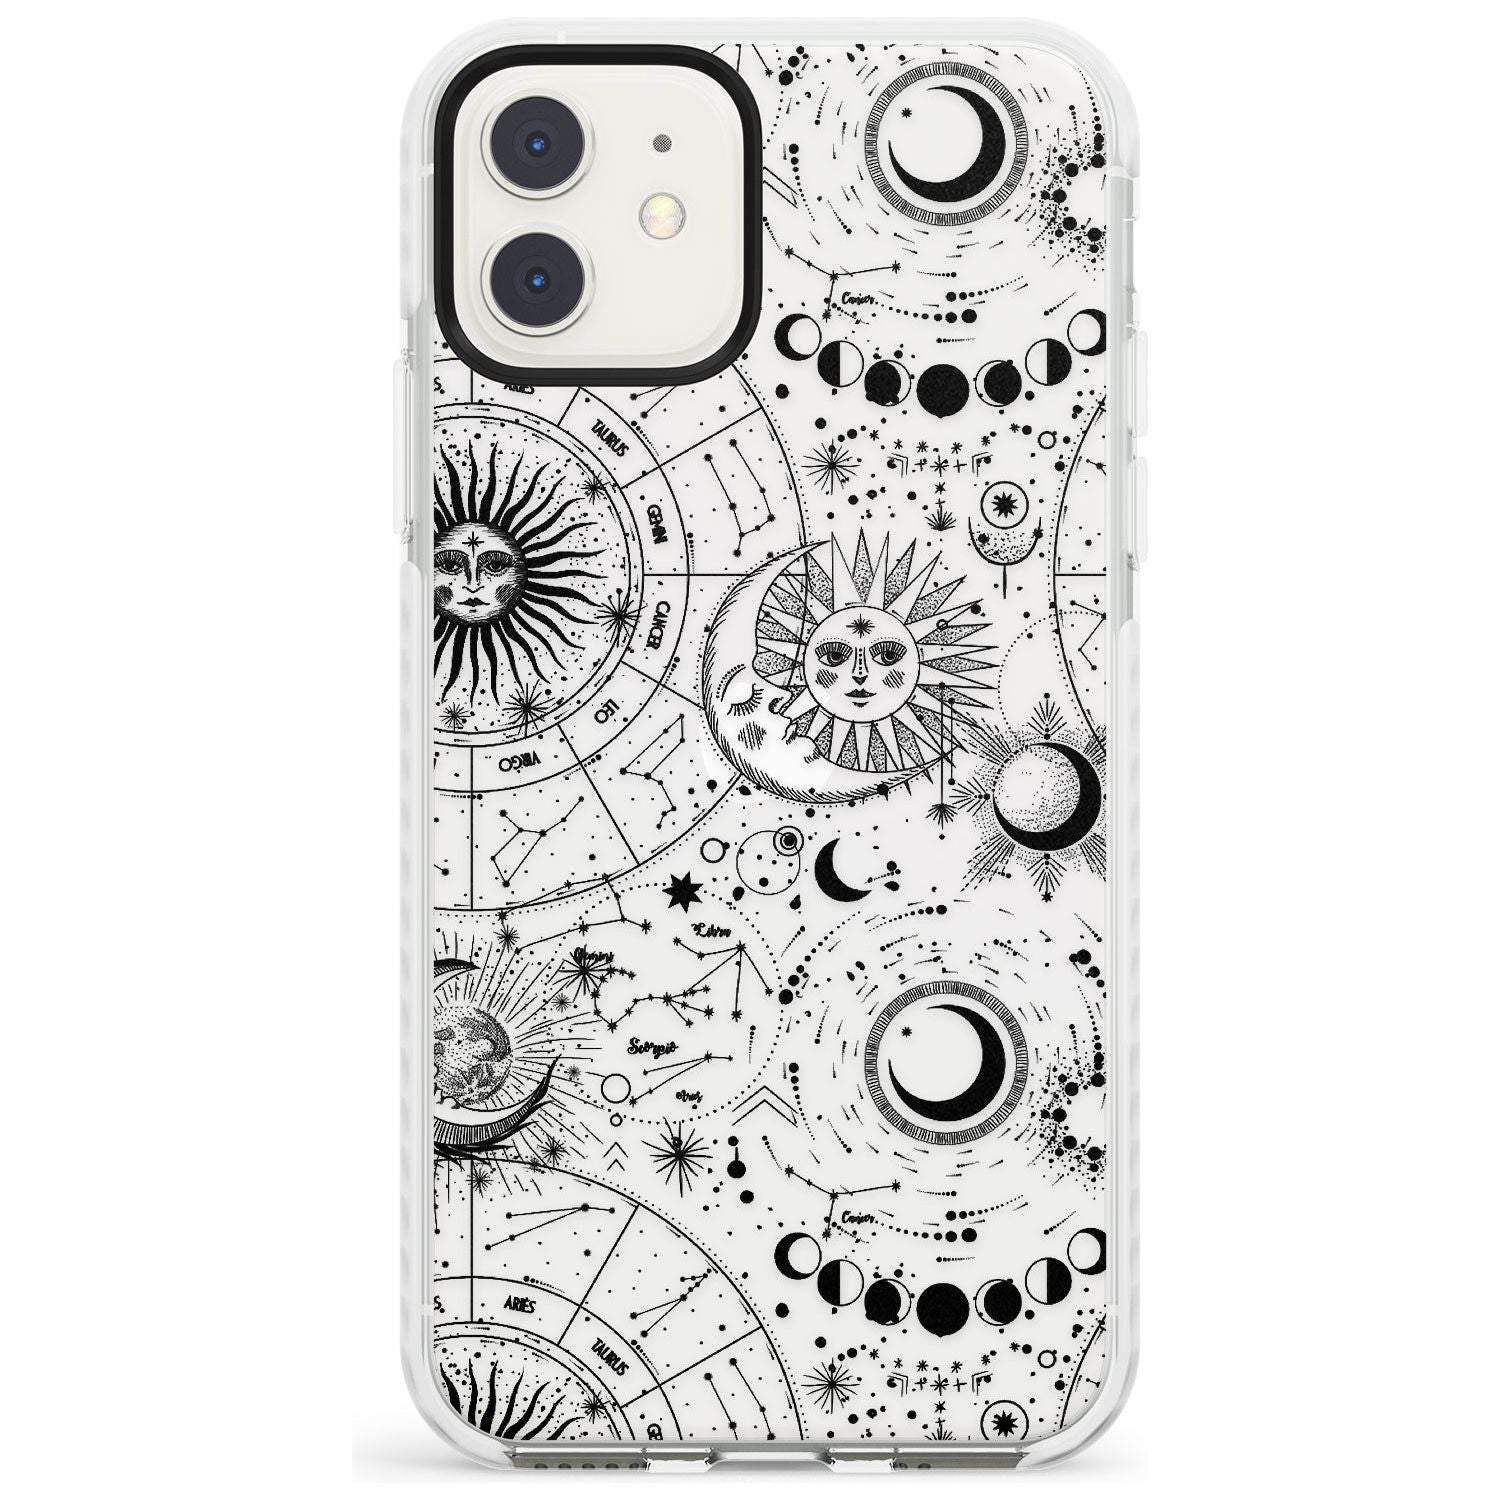 Suns, Moons, Zodiac Signs Astrological Impact Phone Case for iPhone 11